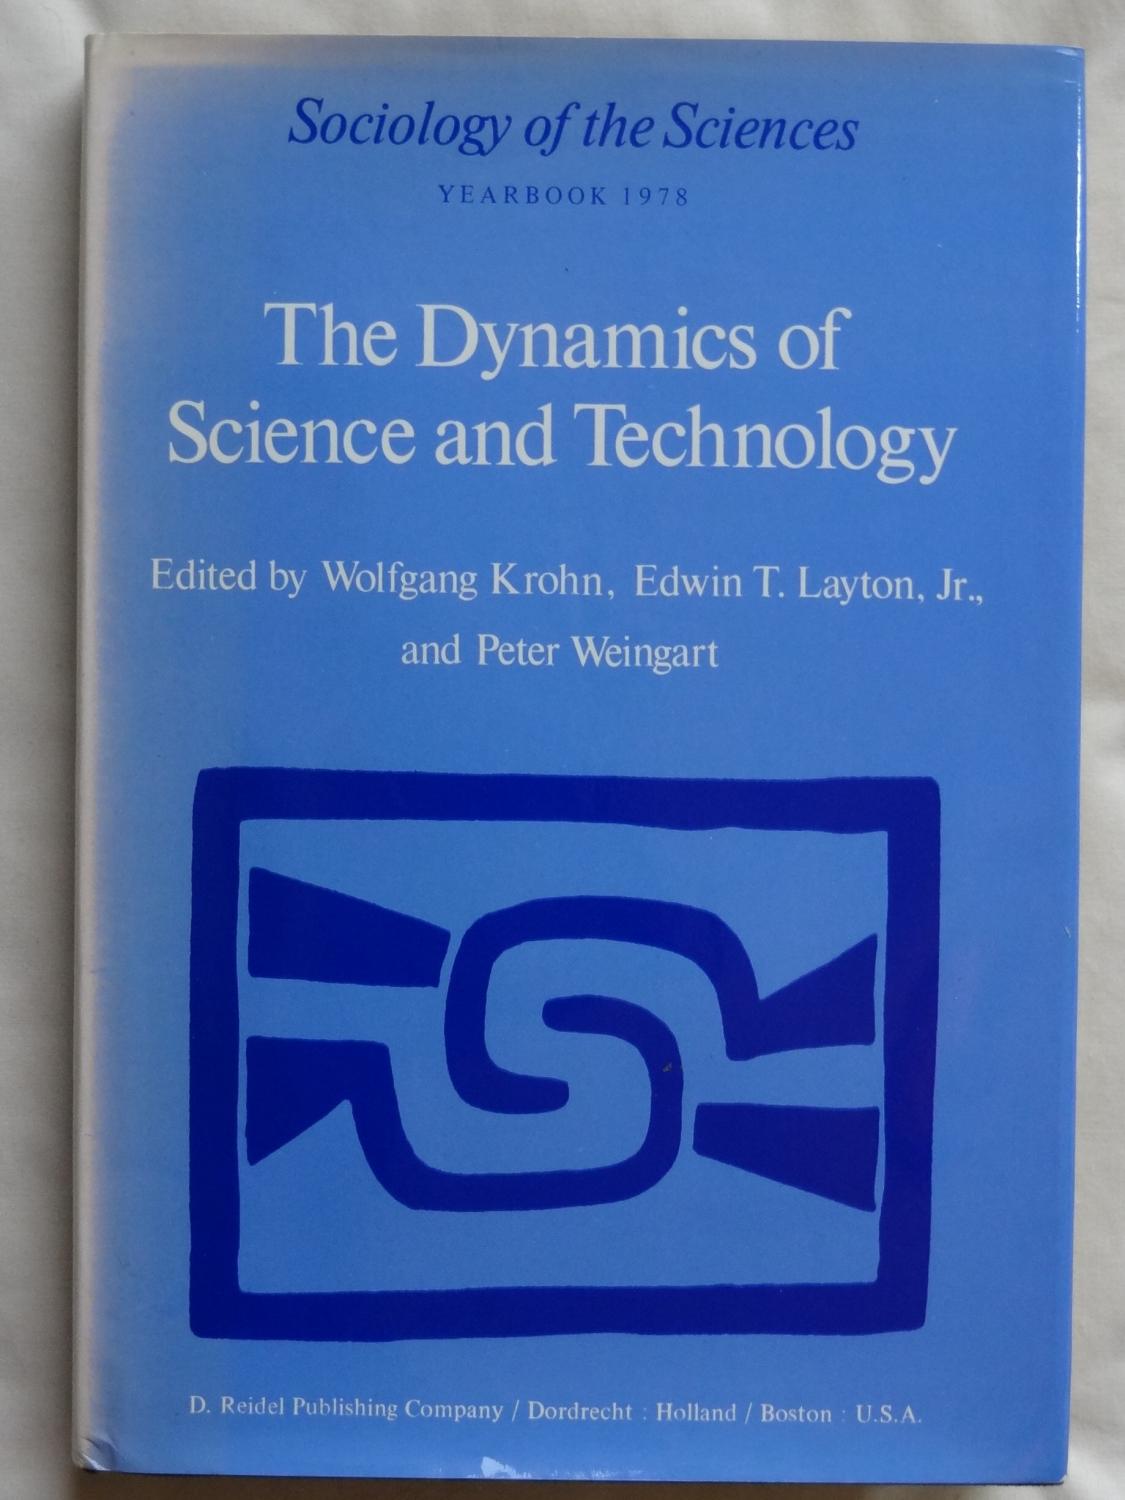 THE DYNAMICS OF SCIENCE AND TECHNOLOGY Social Values, Technical Norms and Scientific Criteria in the Development of Knowledge - KROHN, Wolfgang, LAYTON, Edwin T. & WEINGART, Peter (eds)